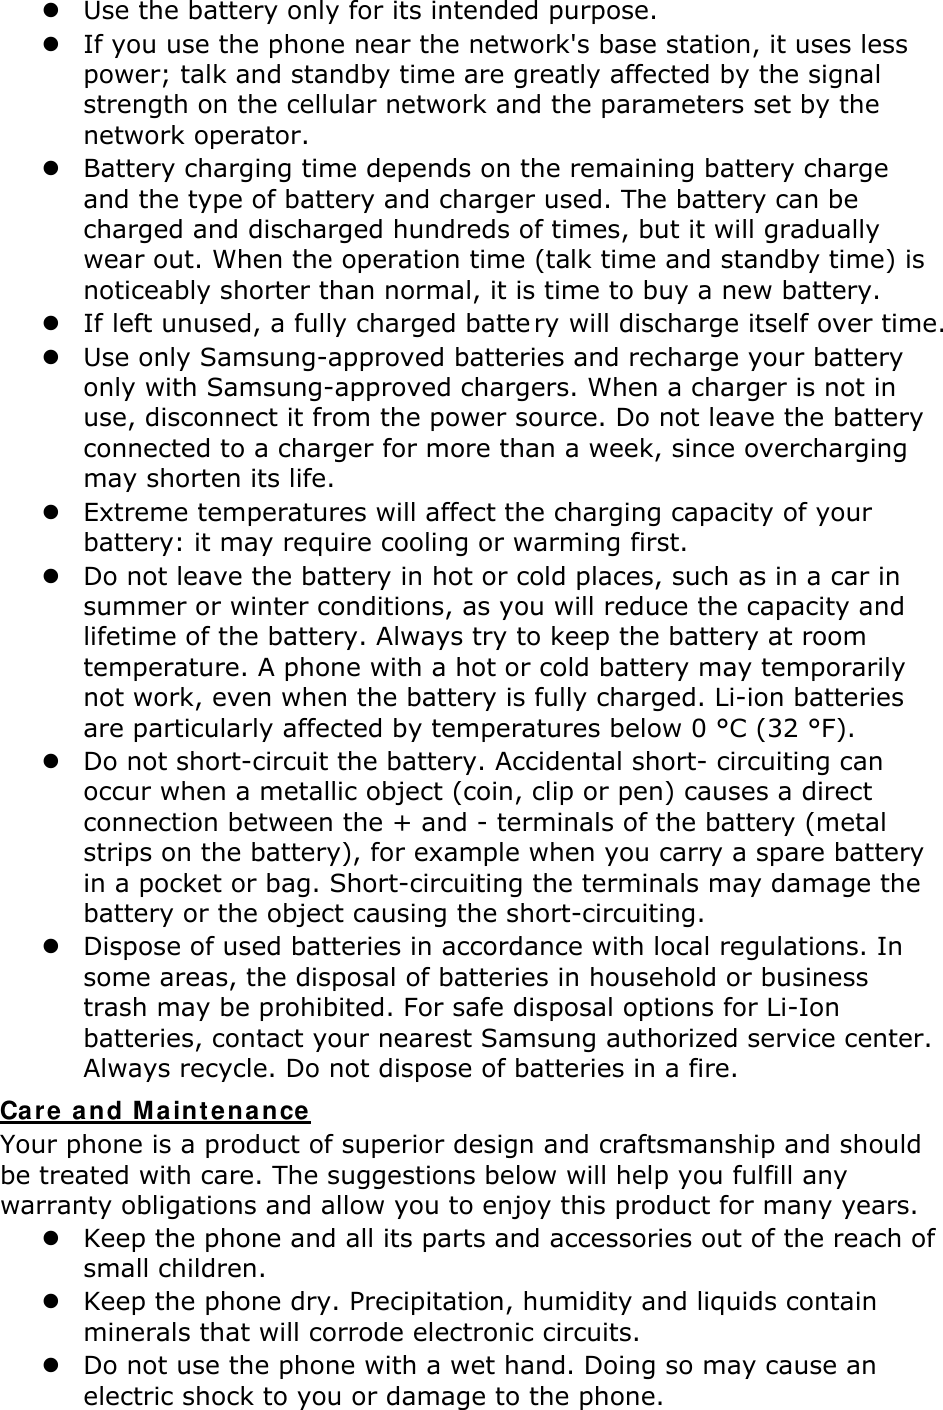  Use the battery only for its intended purpose.  If you use the phone near the network&apos;s base station, it uses less power; talk and standby time are greatly affected by the signal strength on the cellular network and the parameters set by the network operator.  Battery charging time depends on the remaining battery charge and the type of battery and charger used. The battery can be charged and discharged hundreds of times, but it will gradually wear out. When the operation time (talk time and standby time) is noticeably shorter than normal, it is time to buy a new battery.  If left unused, a fully charged batte ry will discharge itself over time.   Use only Samsung-approved batteries and recharge your battery only with Samsung-approved chargers. When a charger is not in use, disconnect it from the power source. Do not leave the battery connected to a charger for more than a week, since overcharging may shorten its life.  Extreme temperatures will affect the charging capacity of your battery: it may require cooling or warming first.  Do not leave the battery in hot or cold places, such as in a car in summer or winter conditions, as you will reduce the capacity and lifetime of the battery. Always try to keep the battery at room temperature. A phone with a hot or cold battery may temporarily not work, even when the battery is fully charged. Li-ion batteries are particularly affected by temperatures below 0 °C (32 °F).  Do not short-circuit the battery. Accidental short- circuiting can occur when a metallic object (coin, clip or pen) causes a direct connection between the + and - terminals of the battery (metal strips on the battery), for example when you carry a spare battery in a pocket or bag. Short-circuiting the terminals may damage the battery or the object causing the short-circuiting.  Dispose of used batteries in accordance with local regulations. In some areas, the disposal of batteries in household or business trash may be prohibited. For safe disposal options for Li-Ion batteries, contact your nearest Samsung authorized service center. Always recycle. Do not dispose of batteries in a fire. Care and M aint enance  Your phone is a product of superior design and craftsmanship and should be treated with care. The suggestions below will help you fulfill any warranty obligations and allow you to enjoy this product for many years.  Keep the phone and all its parts and accessories out of the reach of small children.  Keep the phone dry. Precipitation, humidity and liquids contain minerals that will corrode electronic circuits.  Do not use the phone with a wet hand. Doing so may cause an electric shock to you or damage to the phone. 